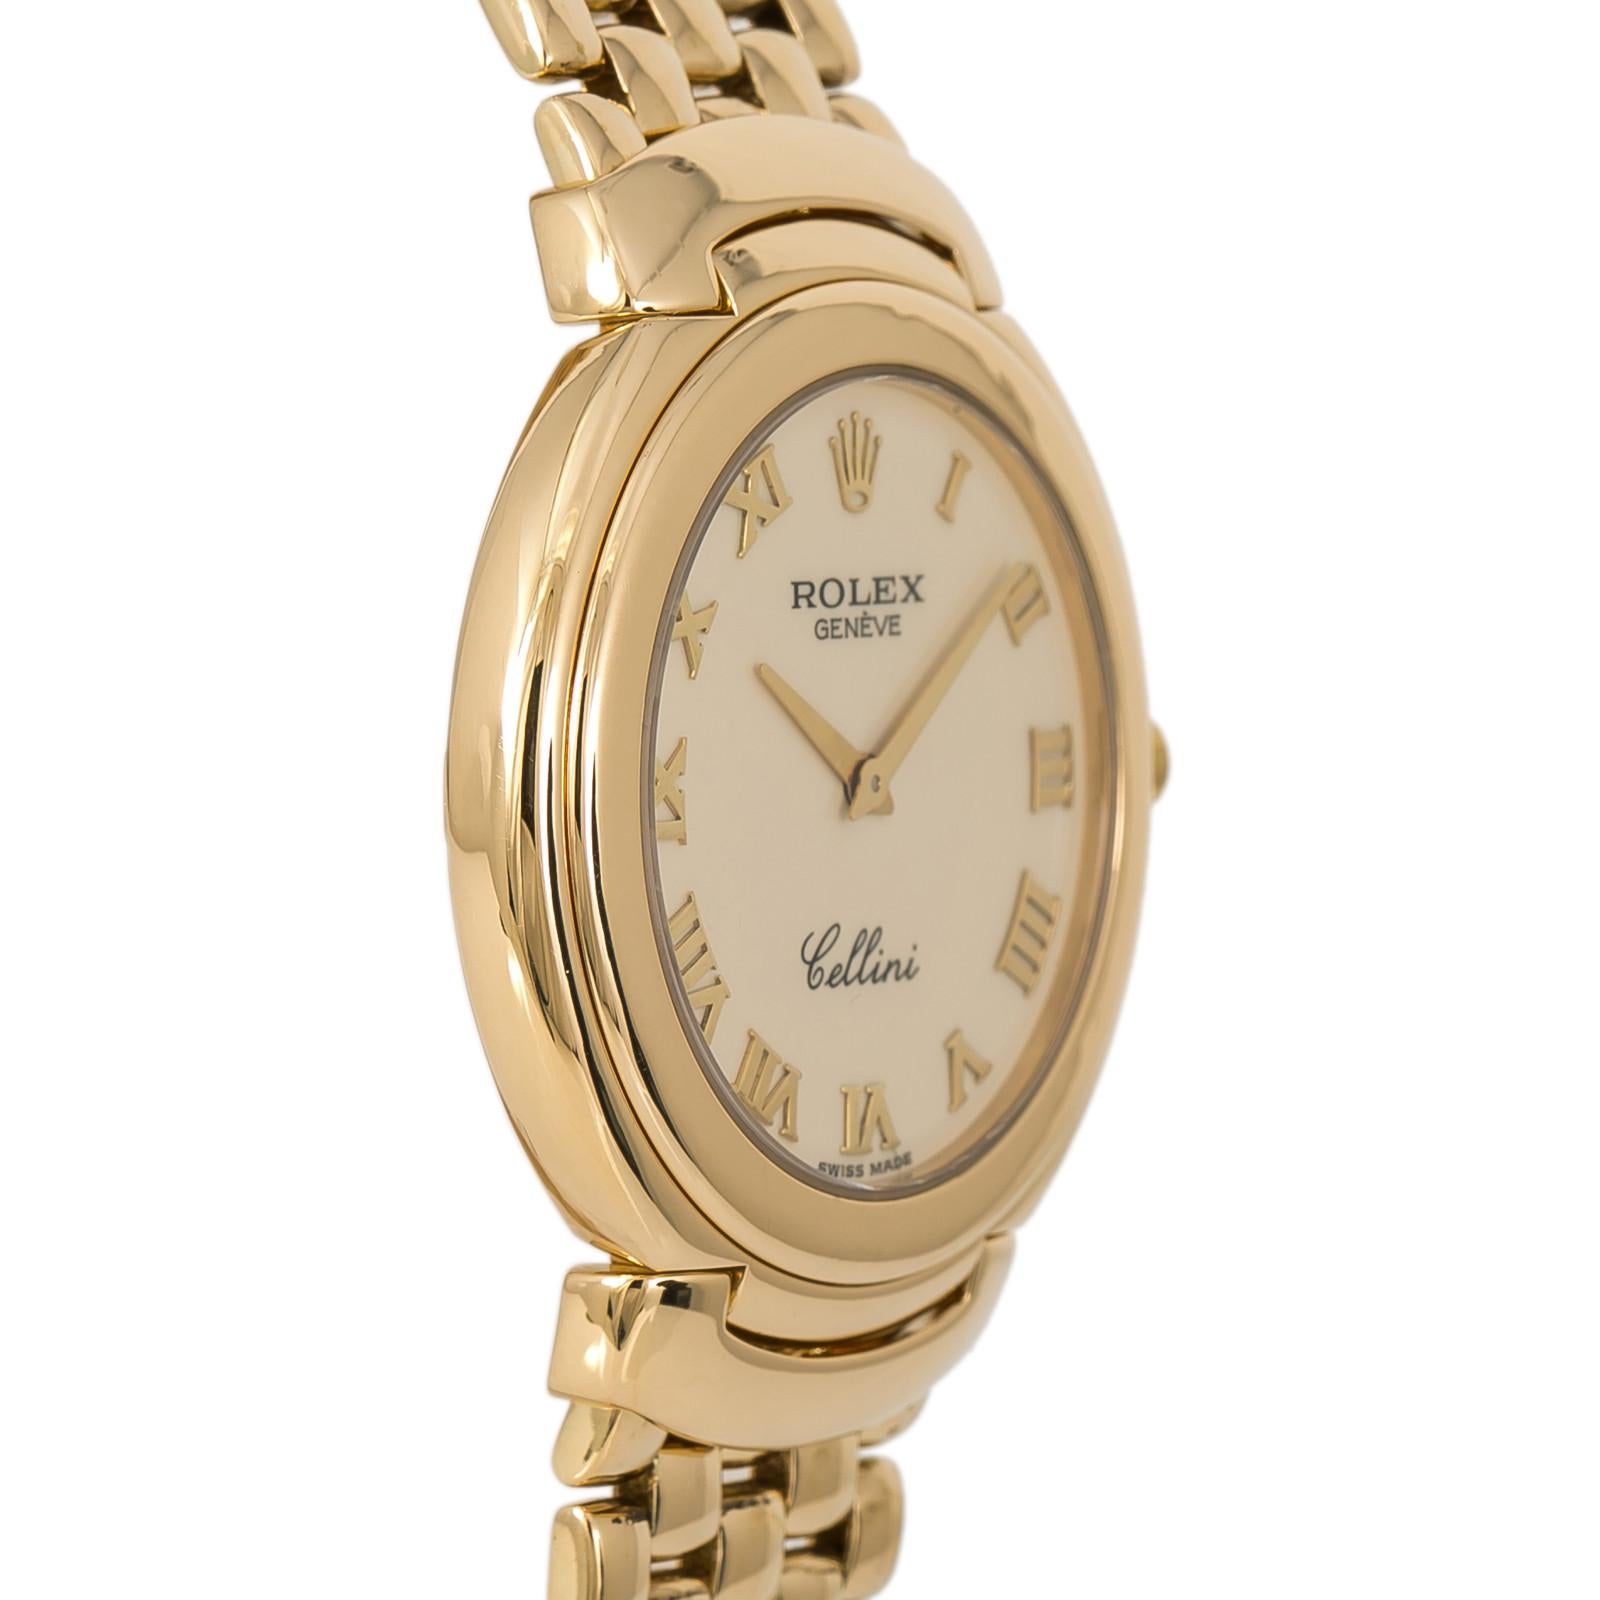 Rolex Cellini Cellissima 6623/8 Mens Watch 37mm 18k Gold Porcelain Dial In Excellent Condition In Miami, FL